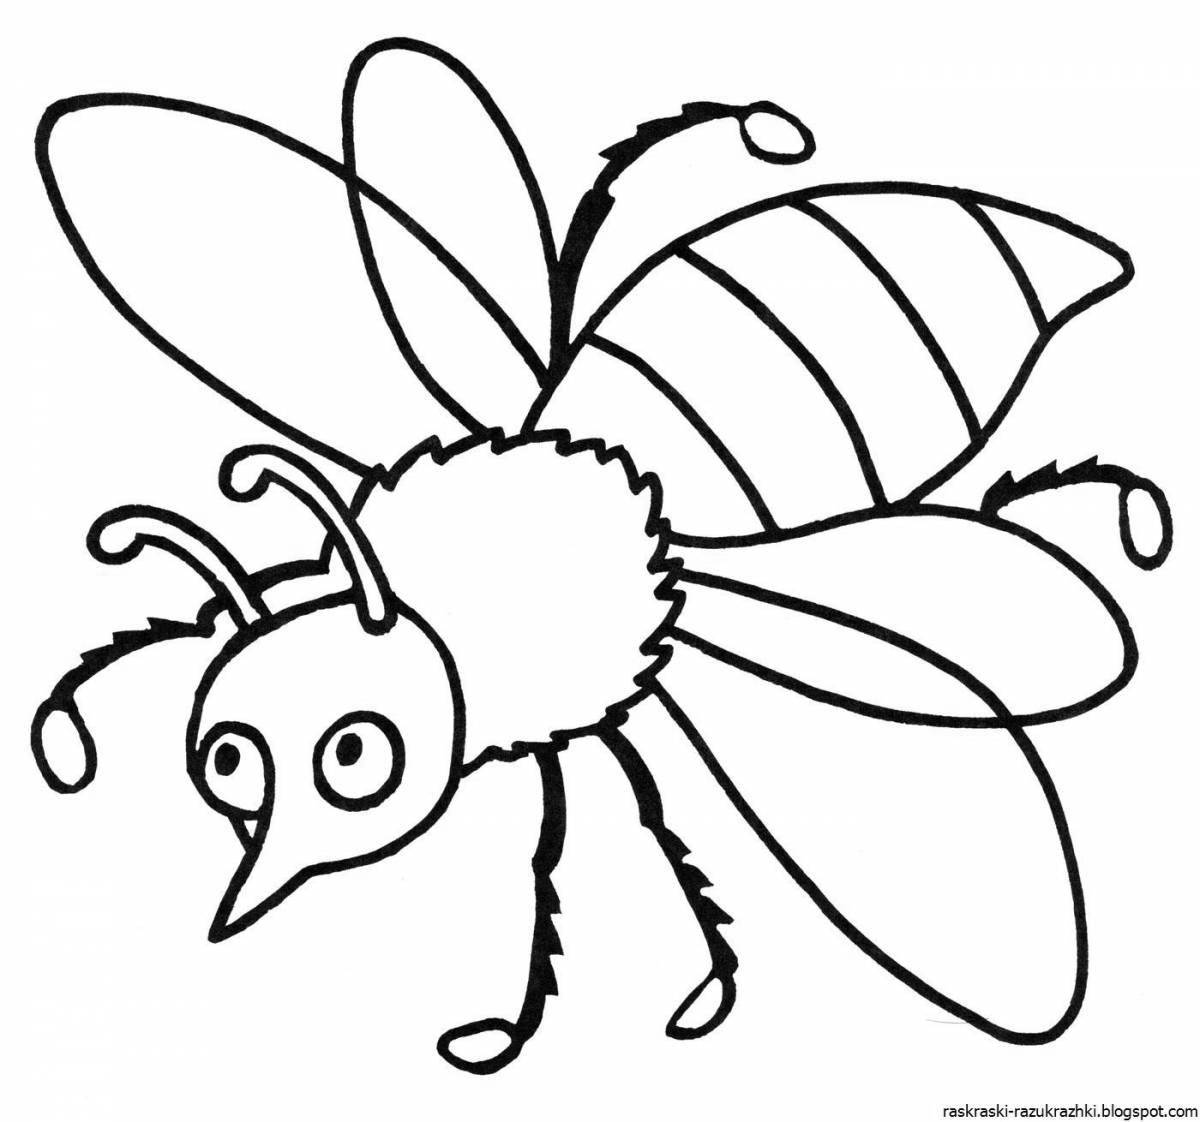 Insects for kids #4